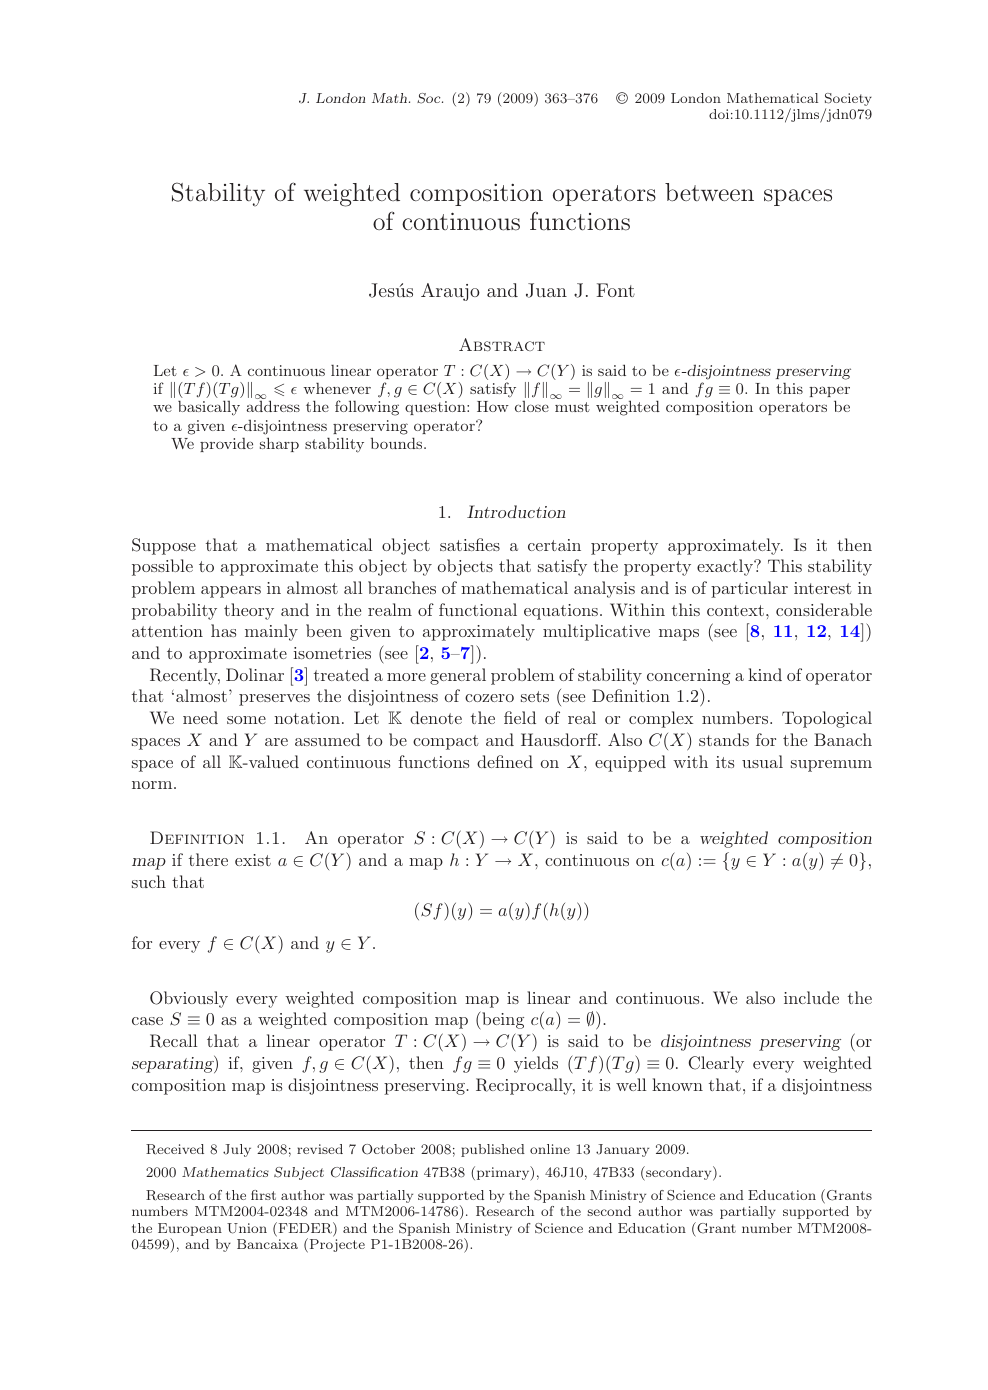 Stability Of Weighted Composition Operators Between Spaces Of Continuous Functions Topic Of Research Paper In Mathematics Download Scholarly Article Pdf And Read For Free On Cyberleninka Open Science Hub